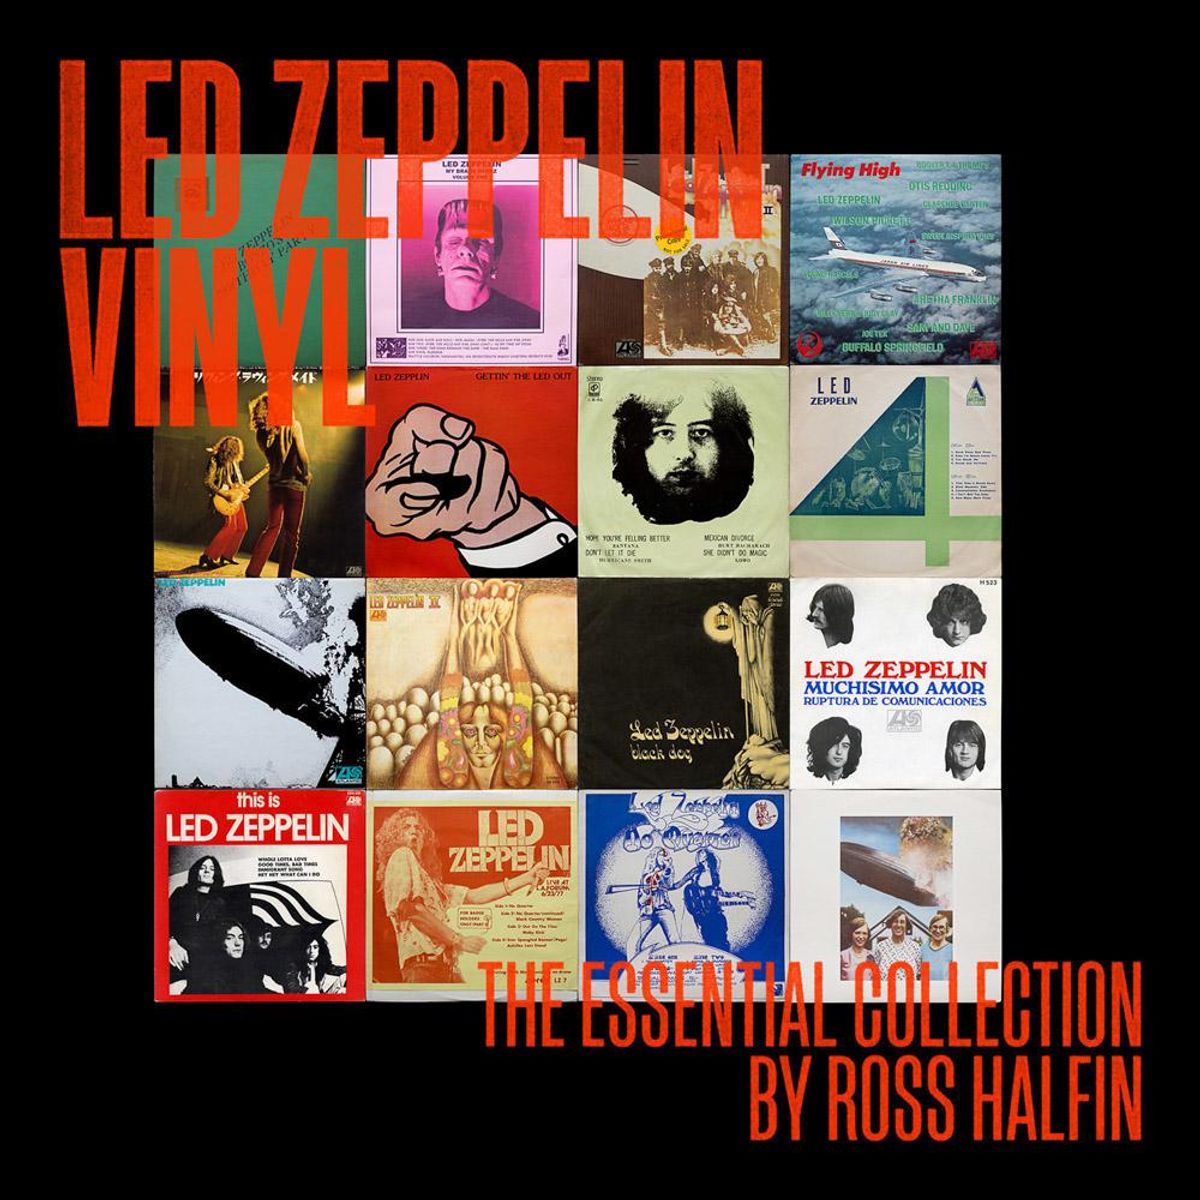 Led Zeppelin Vinyl, The Essential Collection